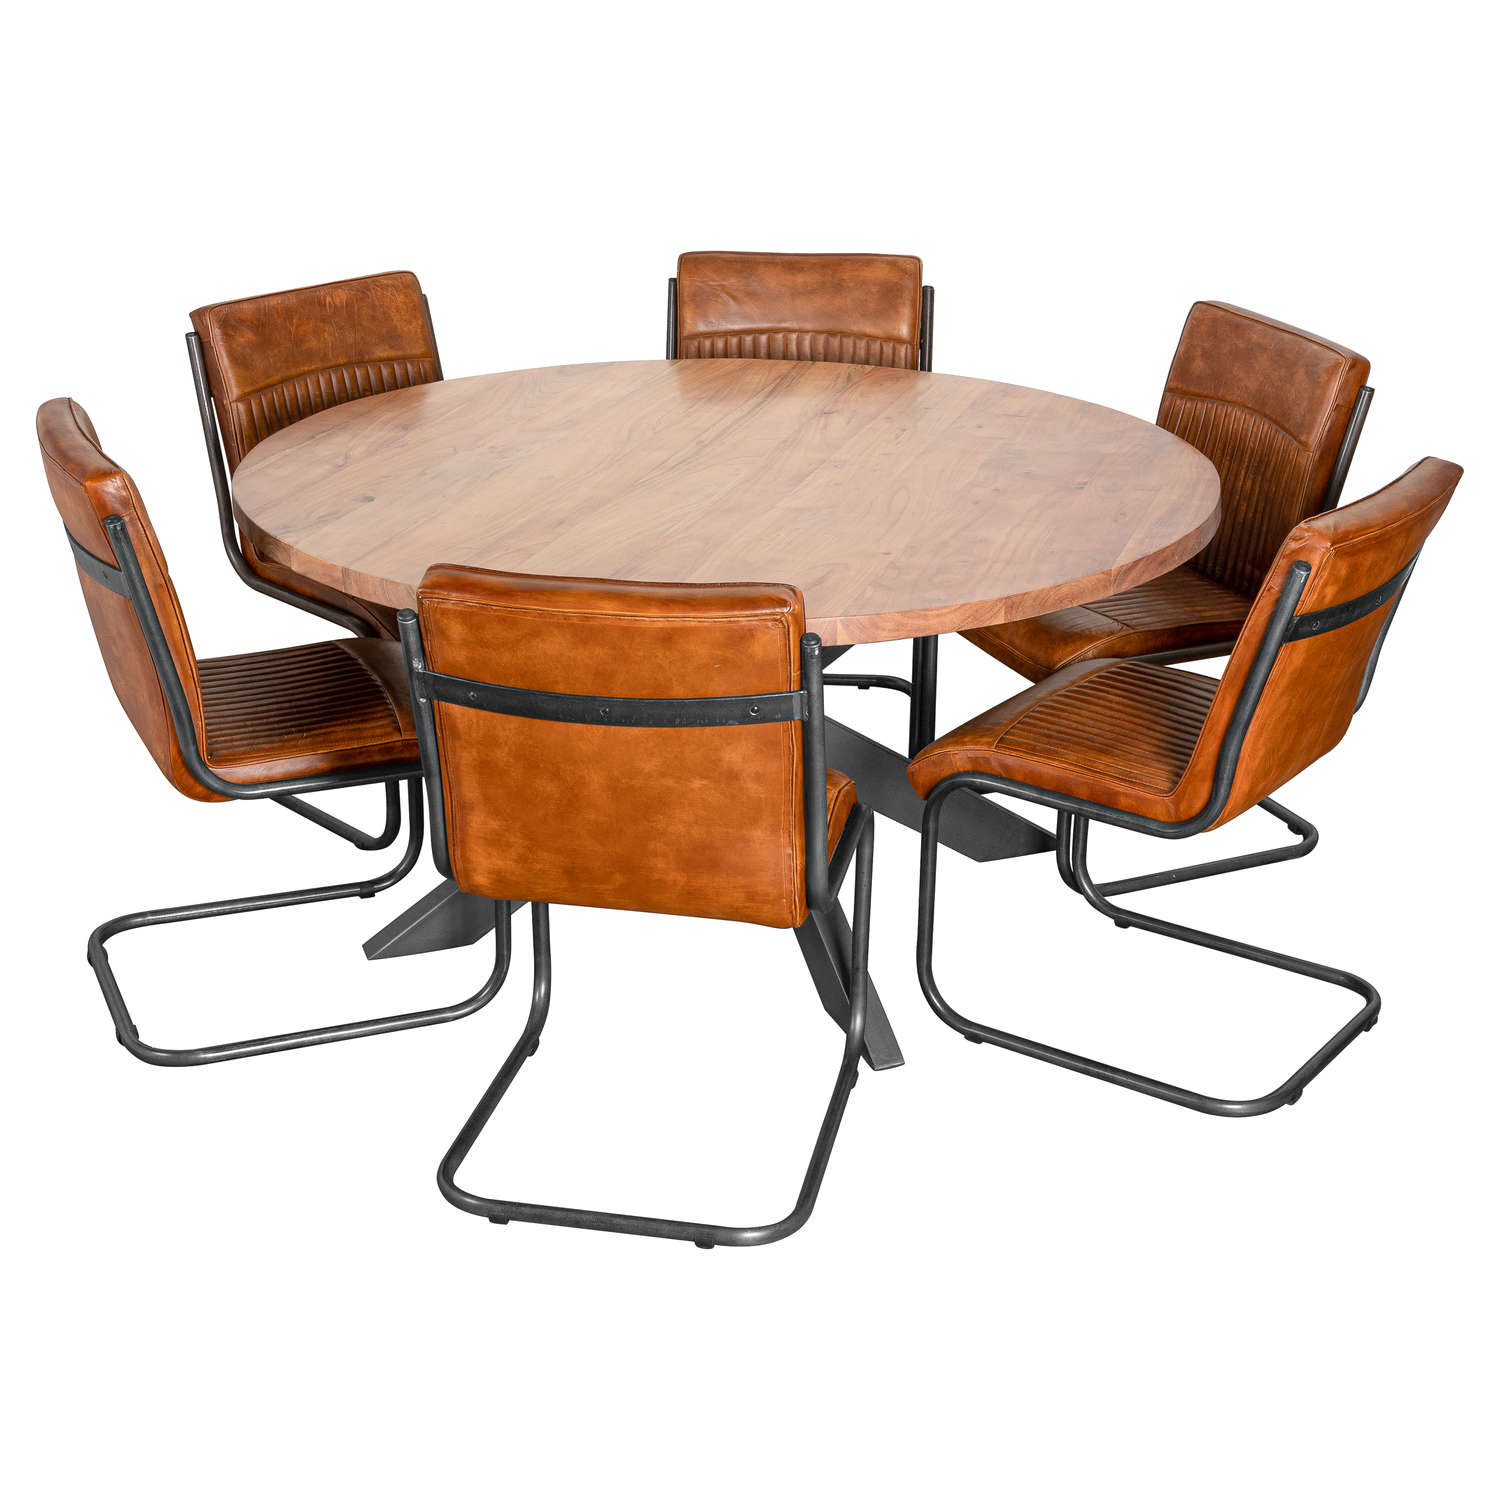 Live Edge Collection Large Round Dining Table - Image 3